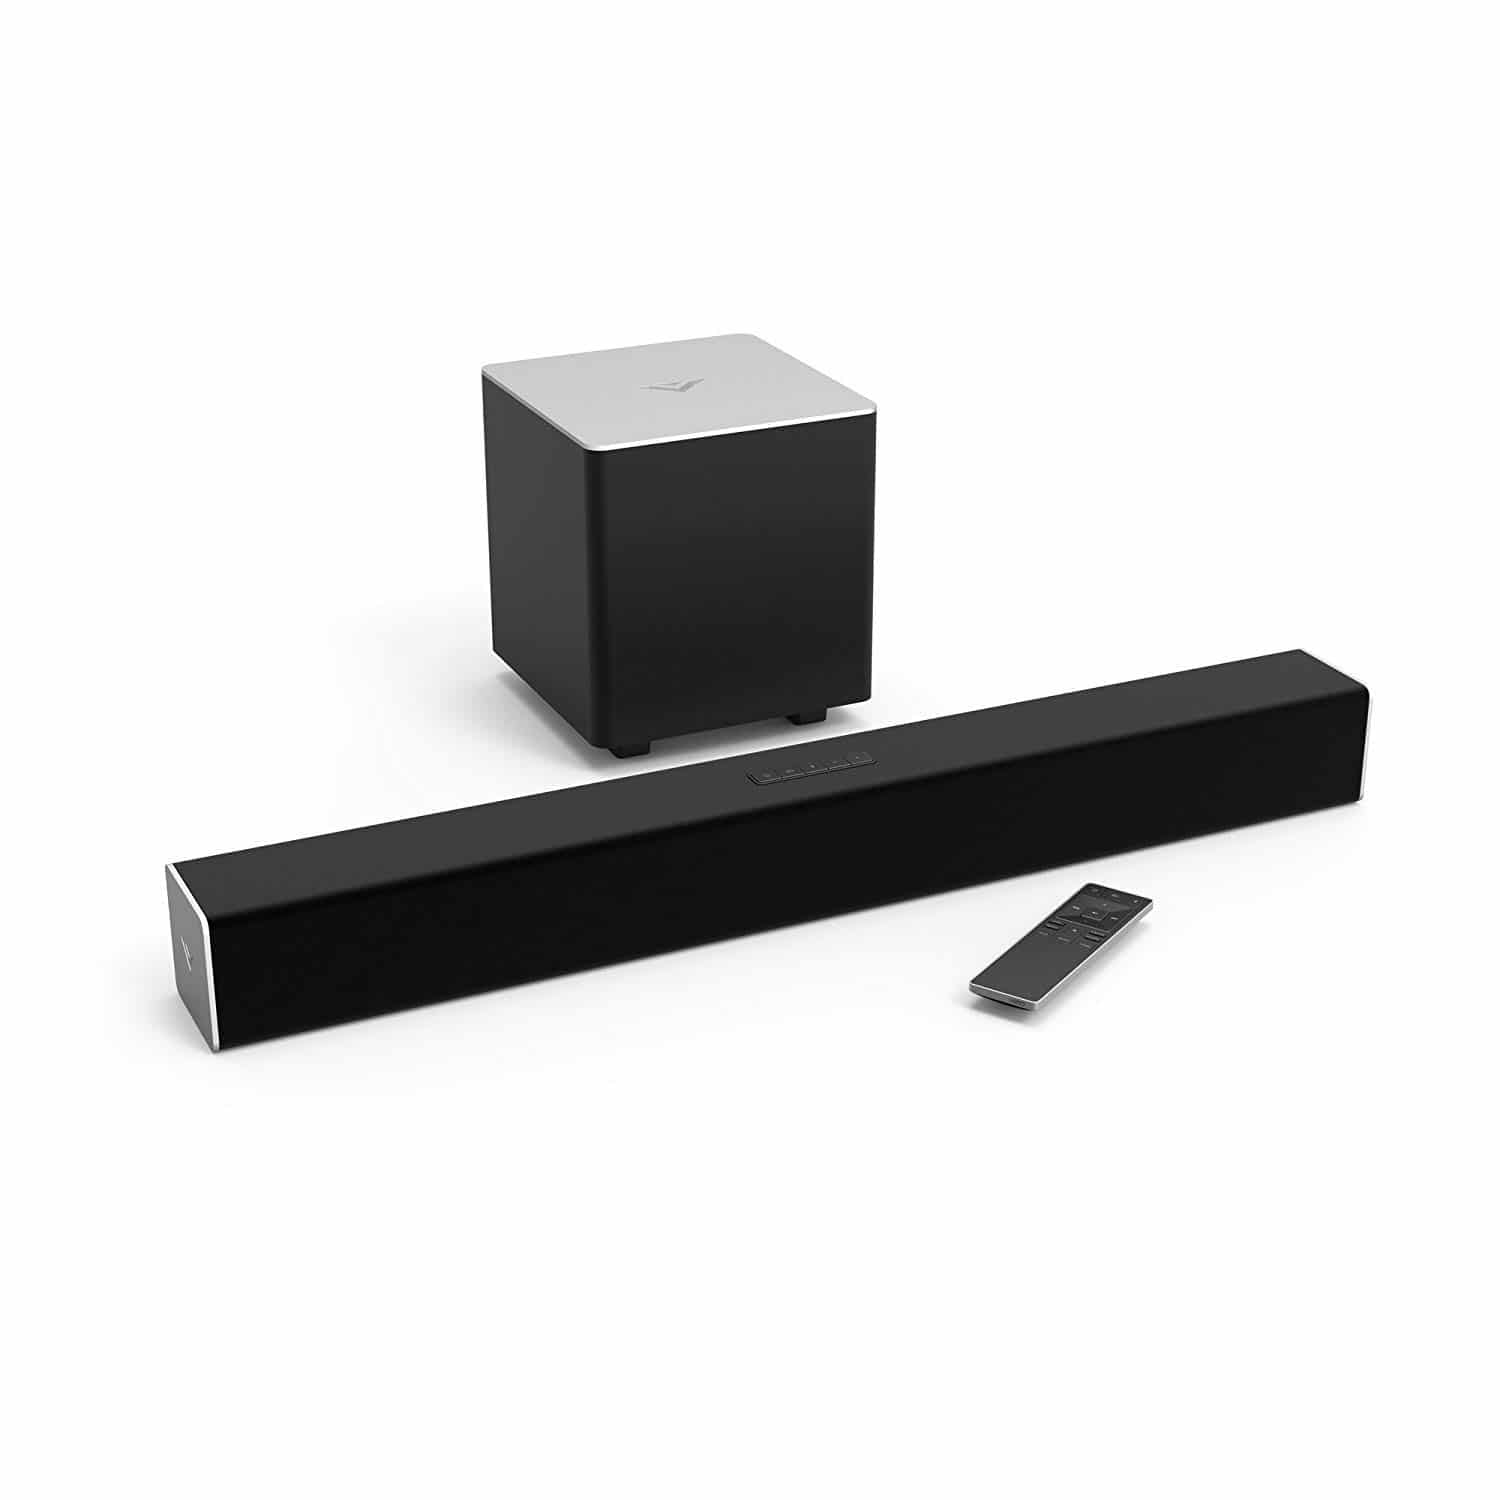 Top 10 Best Sound Bars with BuiltIn Subwoofer in 2022